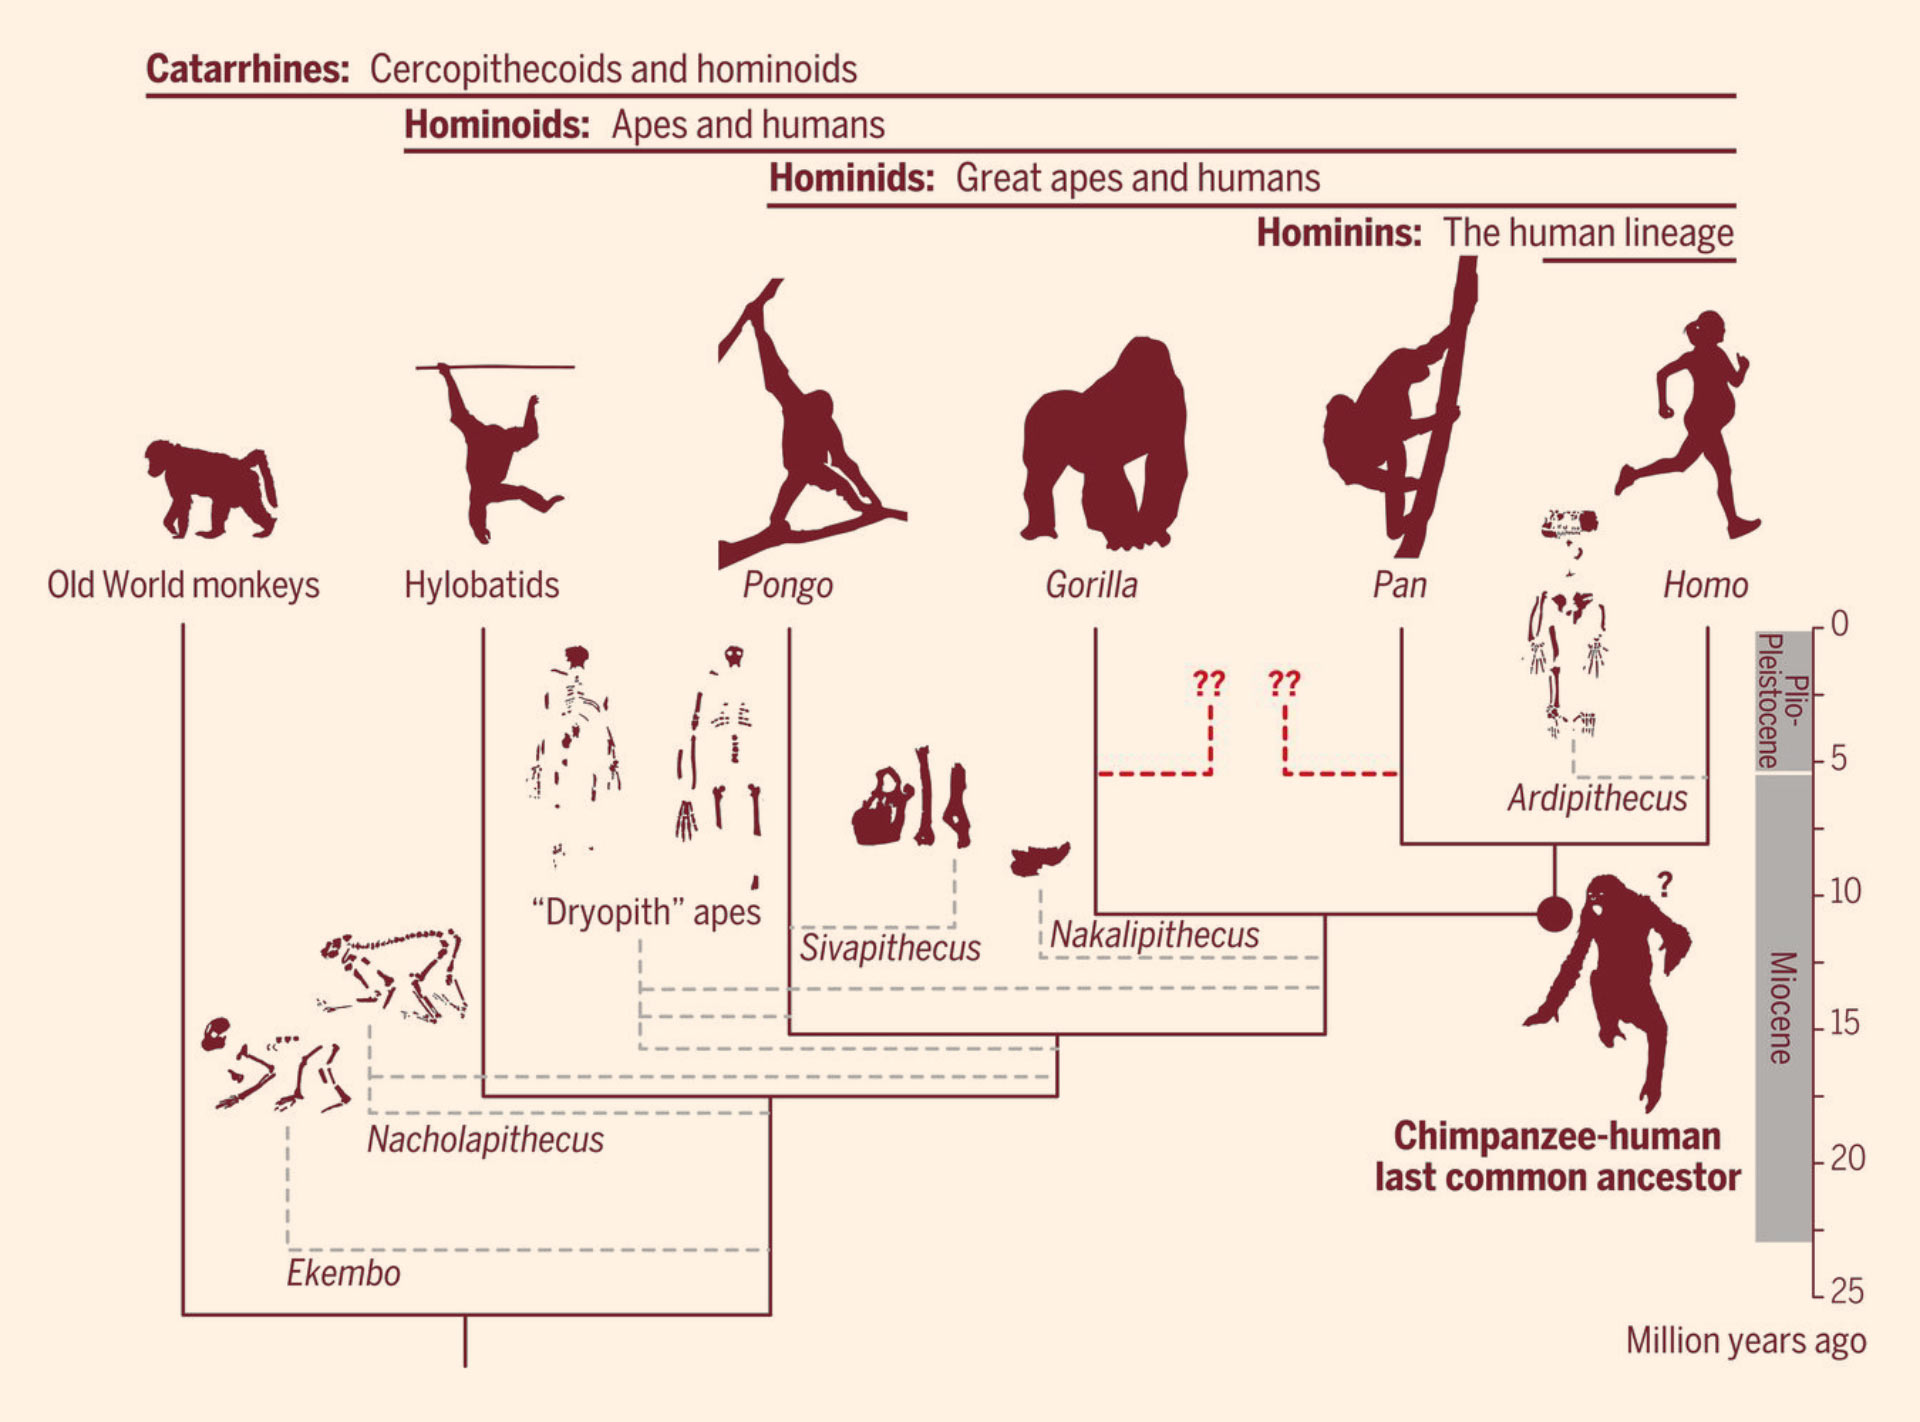 Do Hominins include apes?